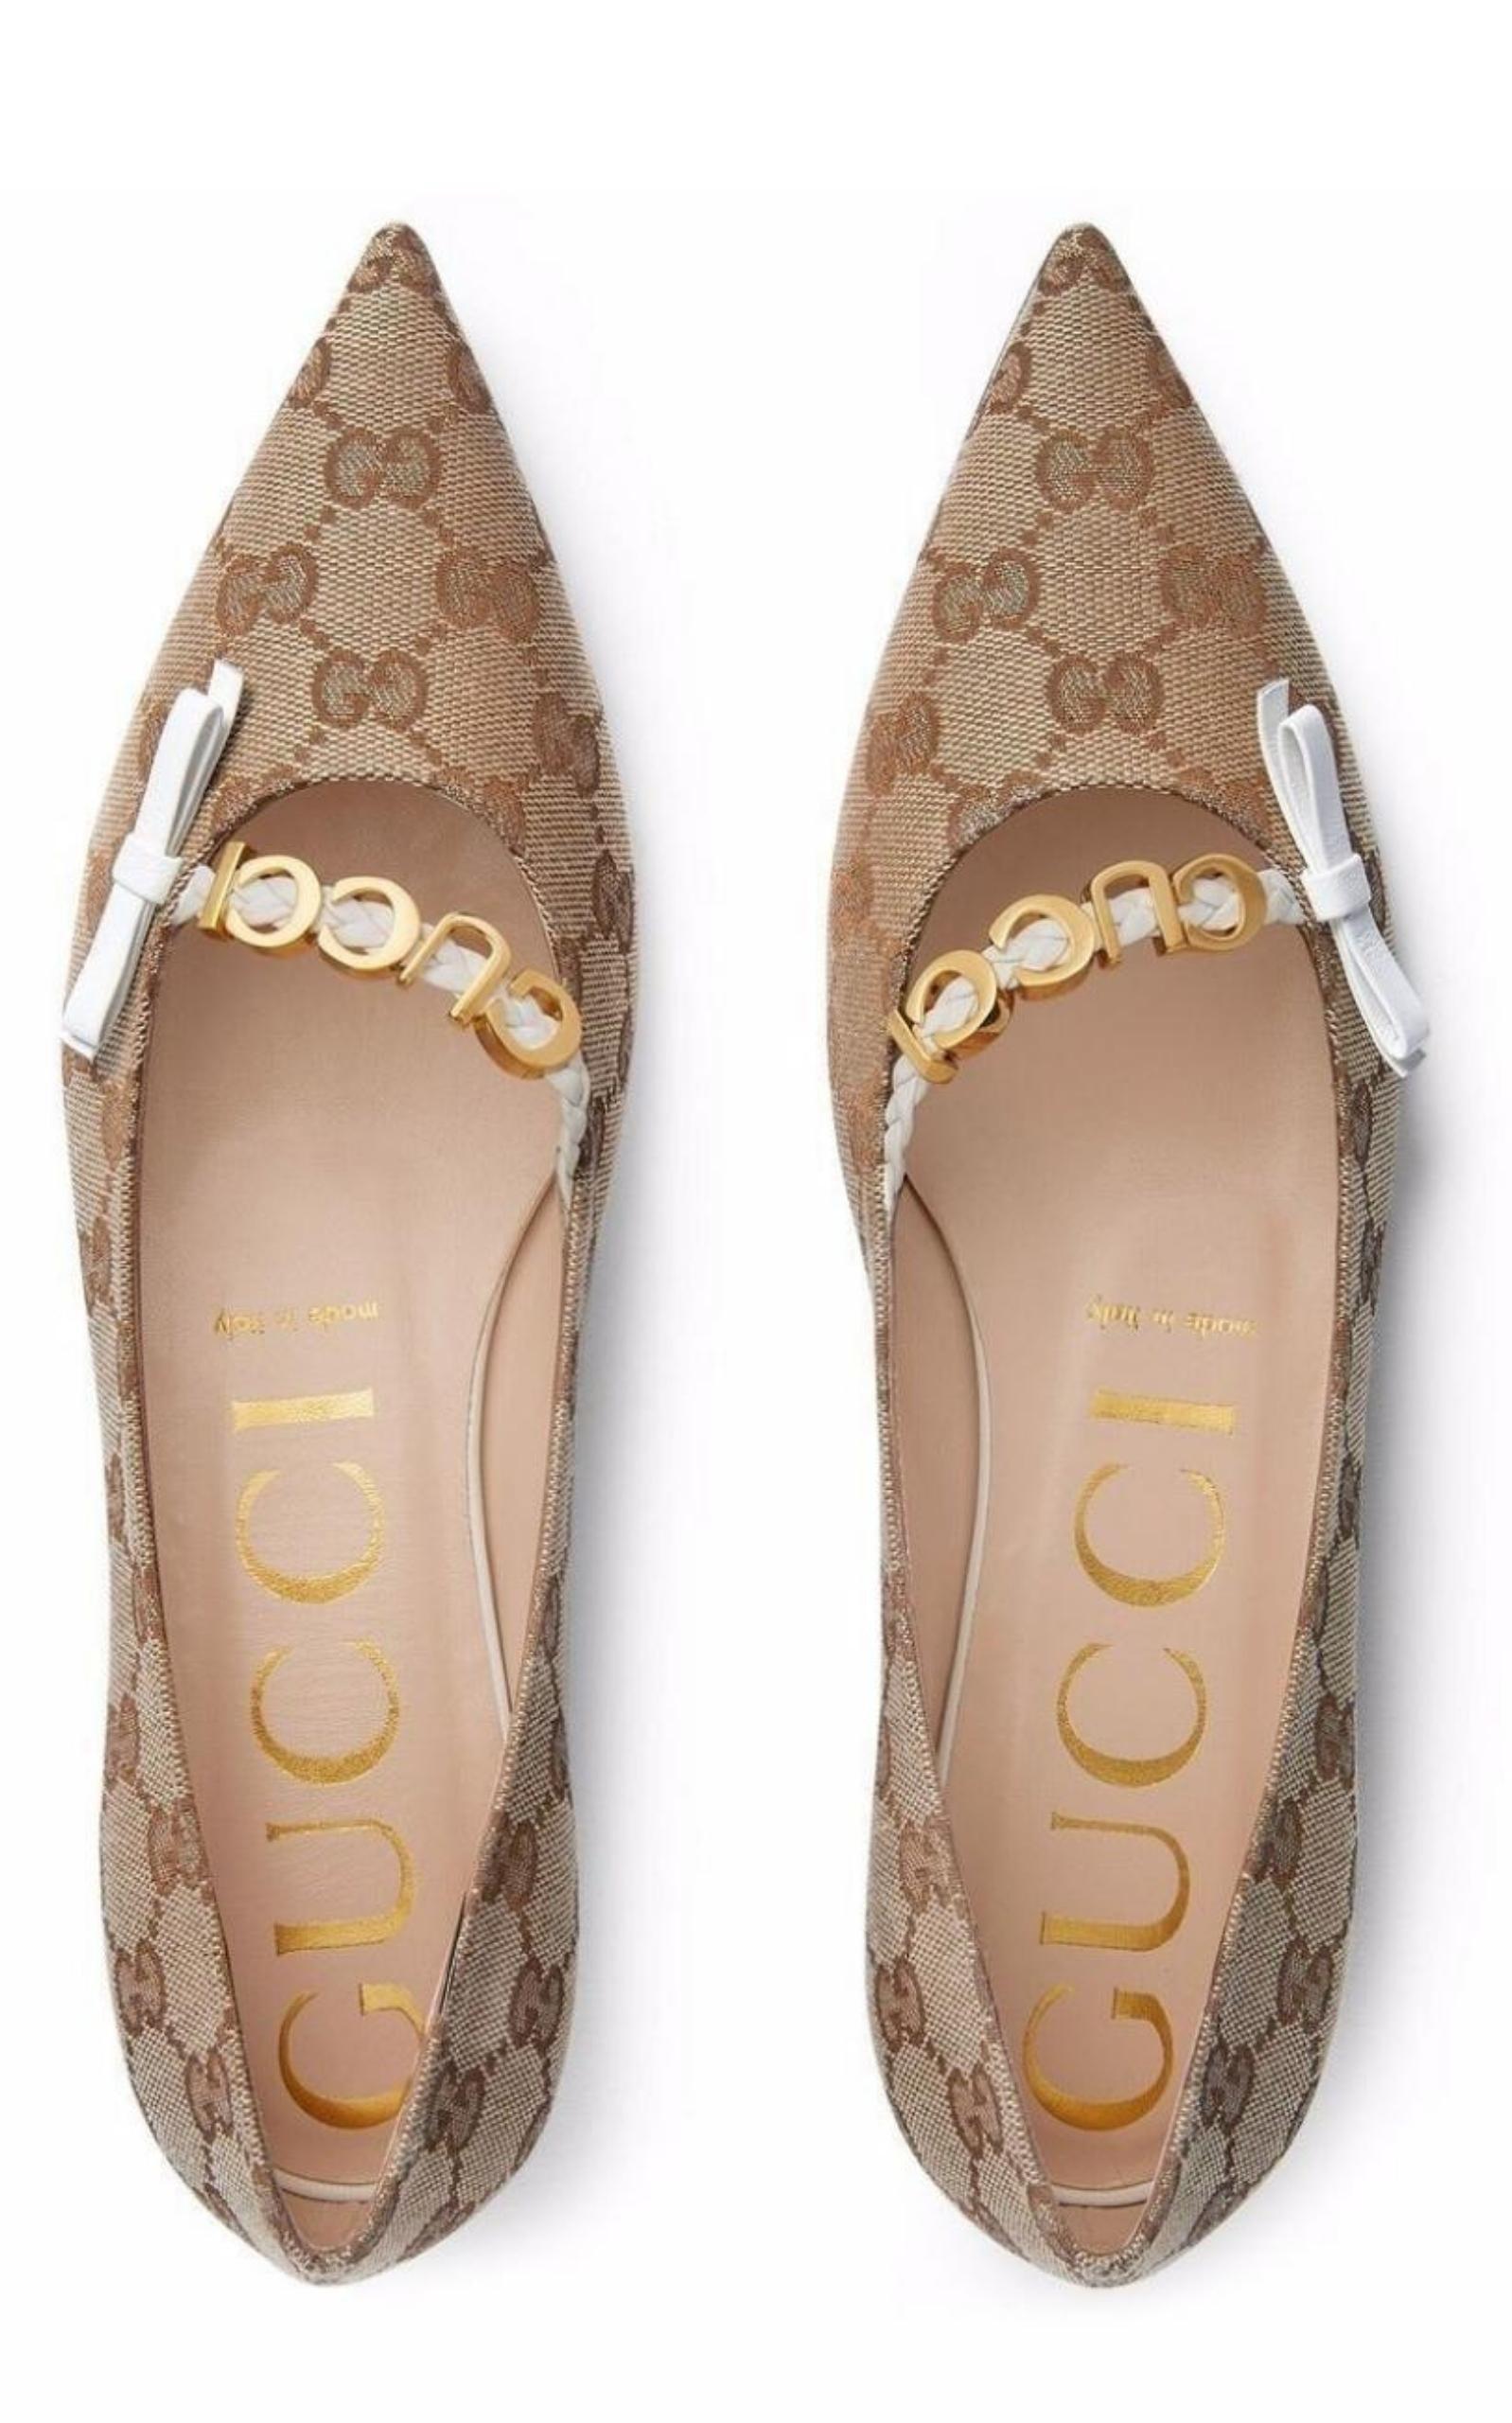 Gucci Gg Supreme Ballet Flats in Natural | Lyst